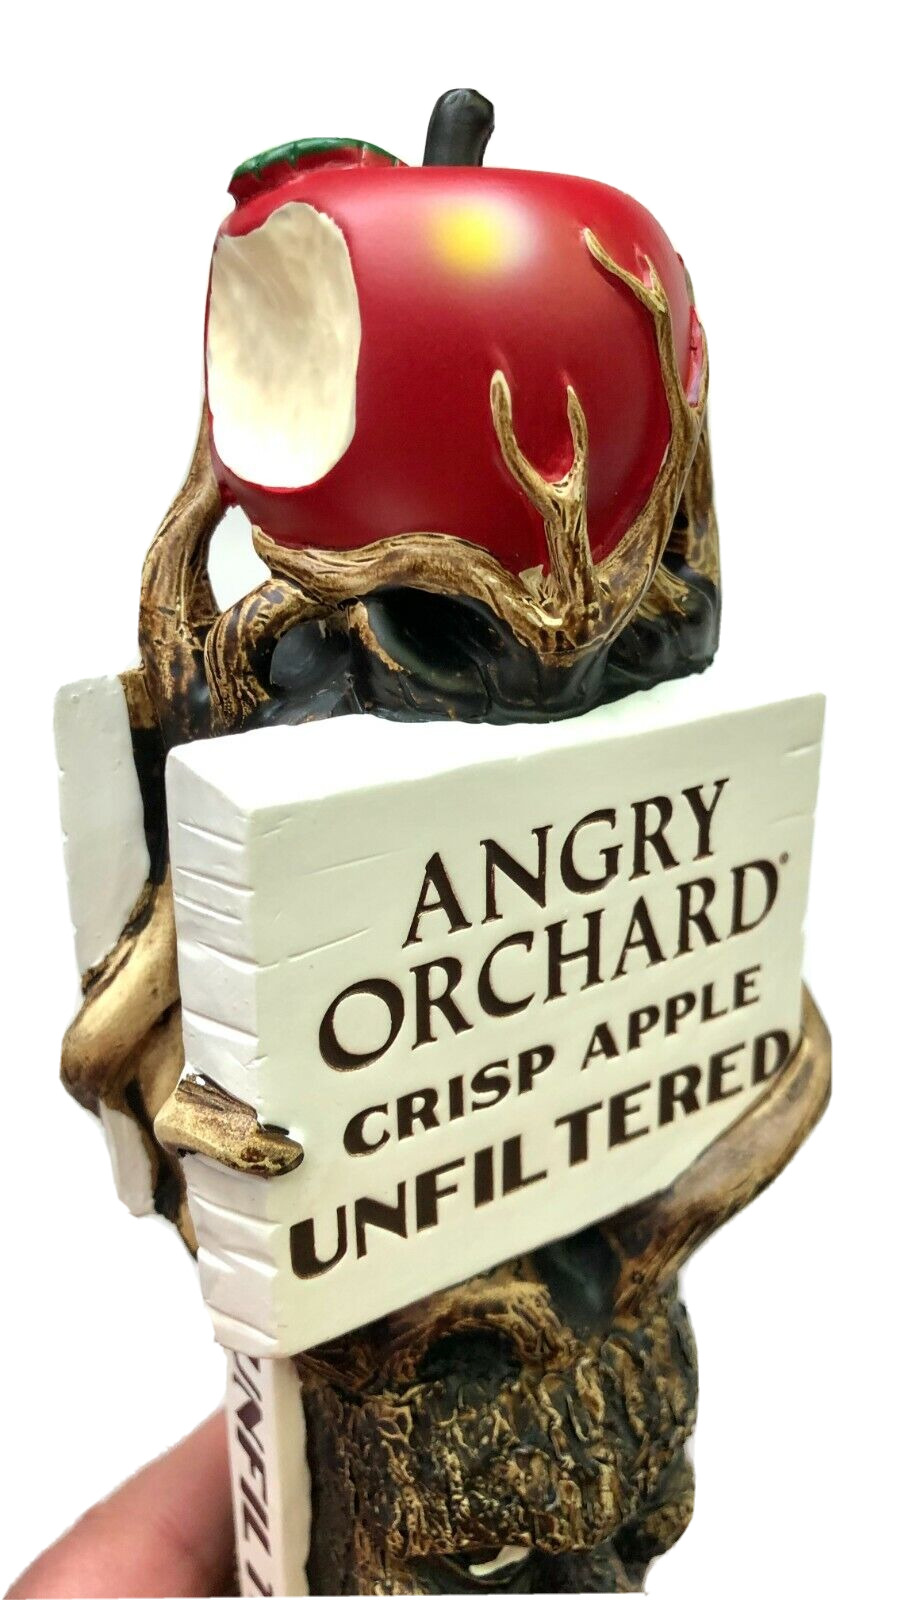 *NEW* ANGRY ORCHARD - CRISP APPLE UNFILTERED - BEER TAP HANDLE - SHORTY 8